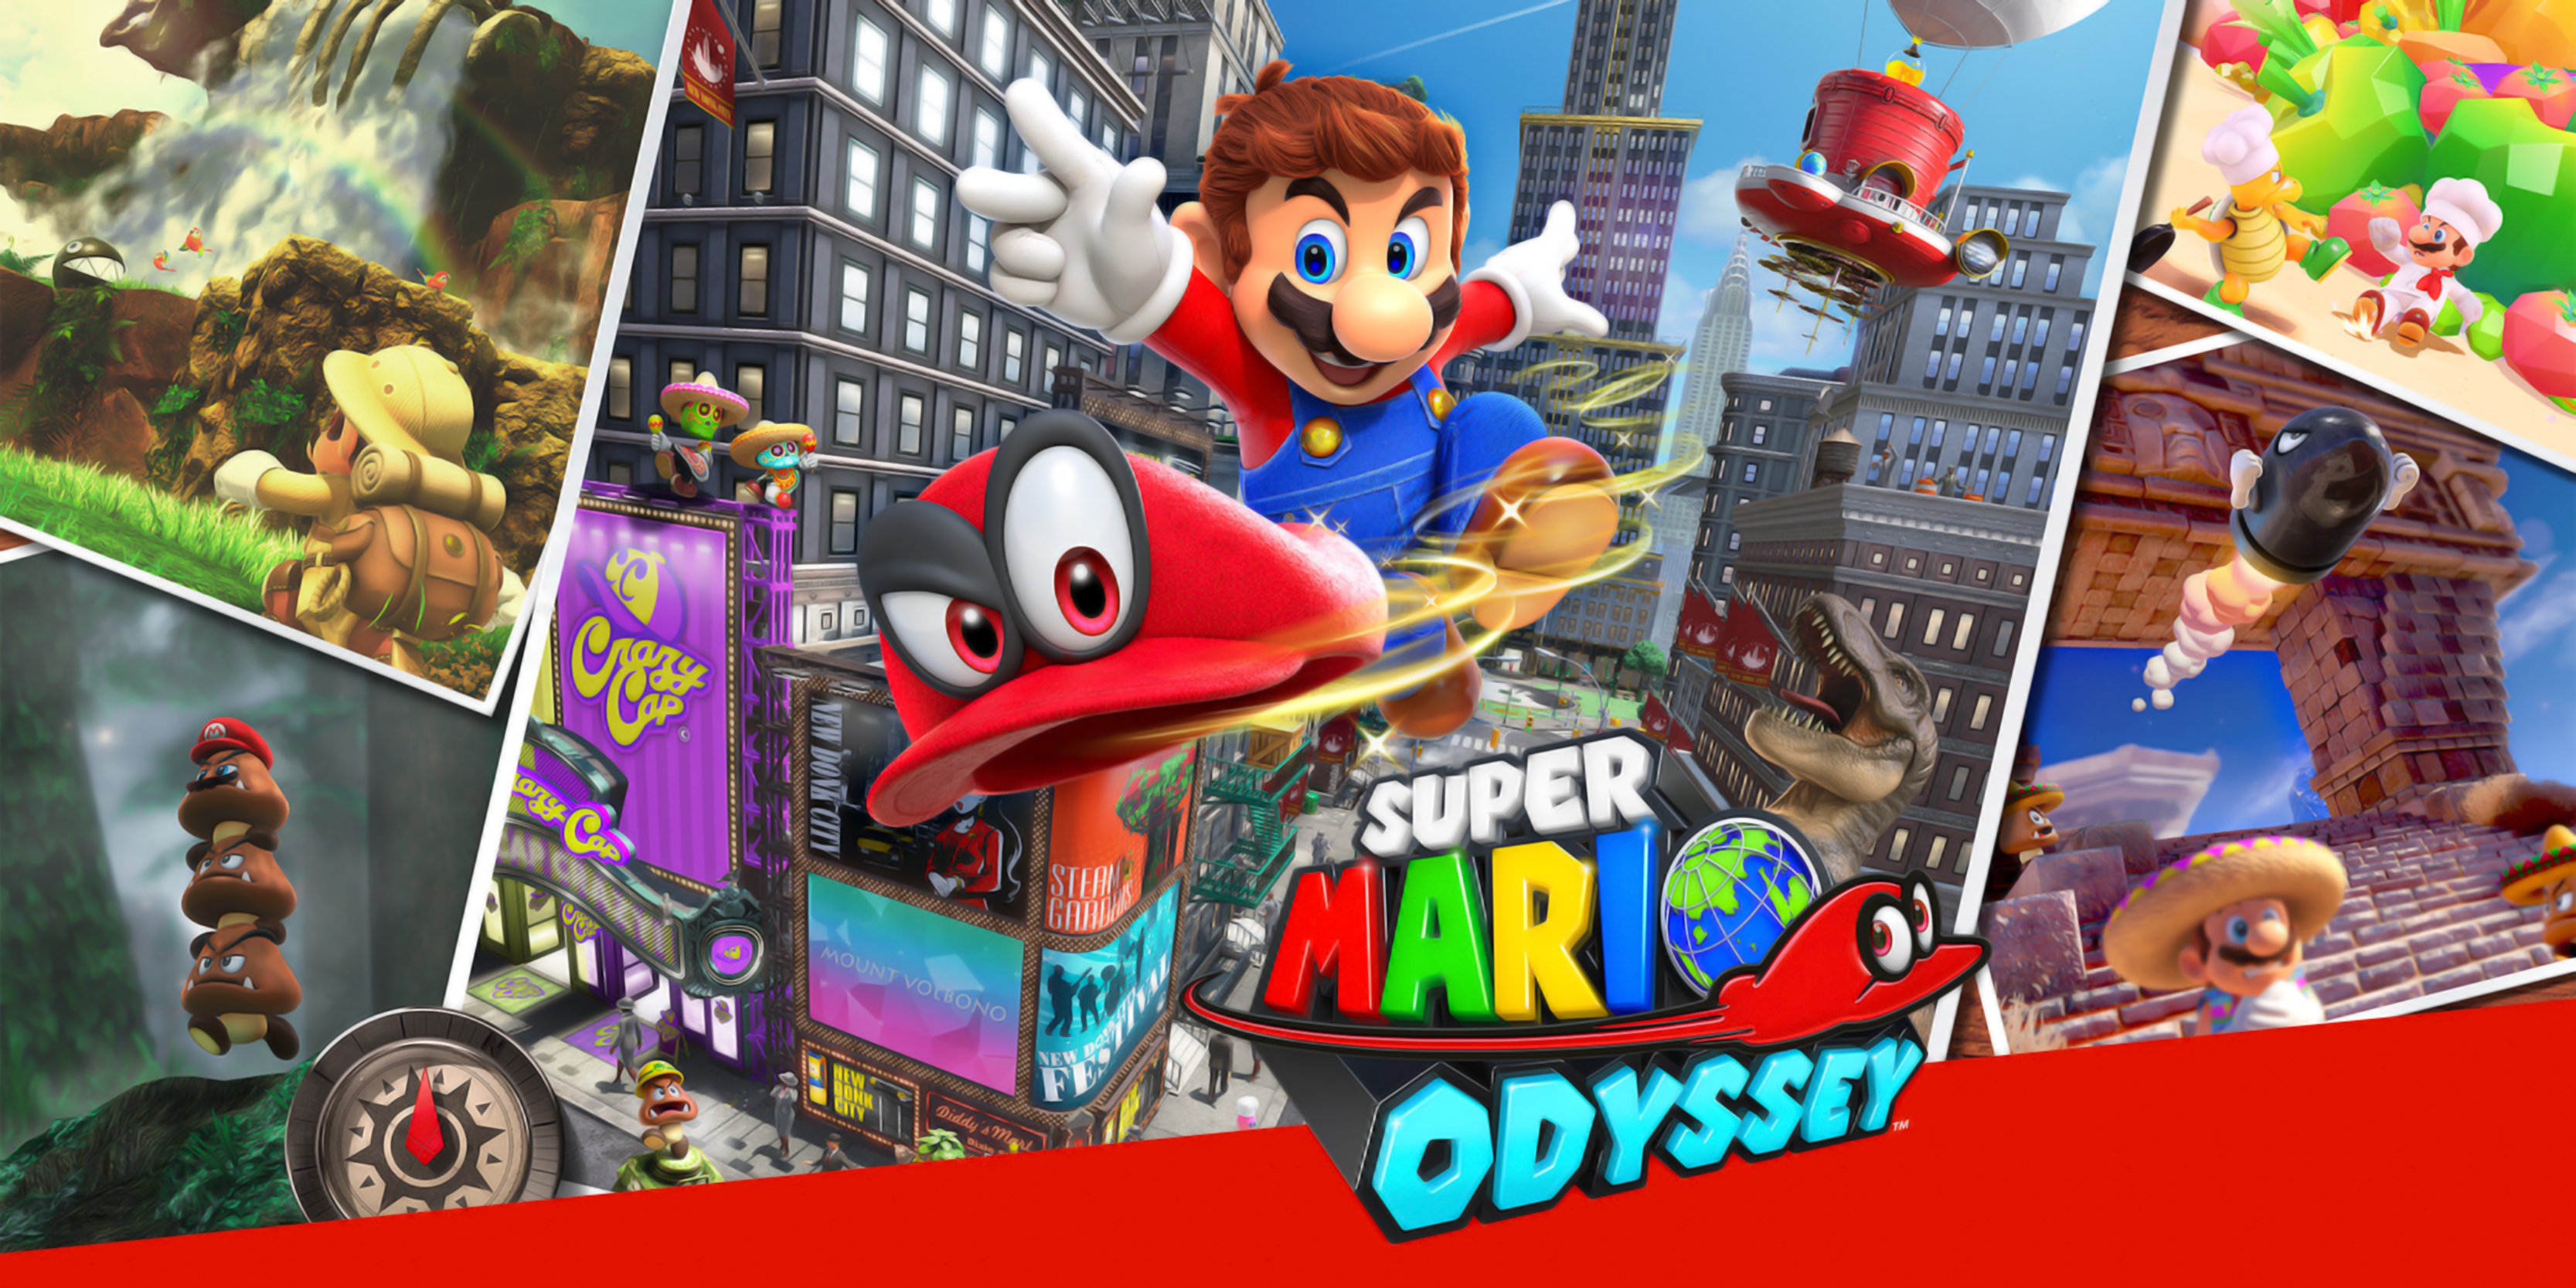 10 Best Super Mario Odyssey Wallpaper FULL HD 1080p For PC Background